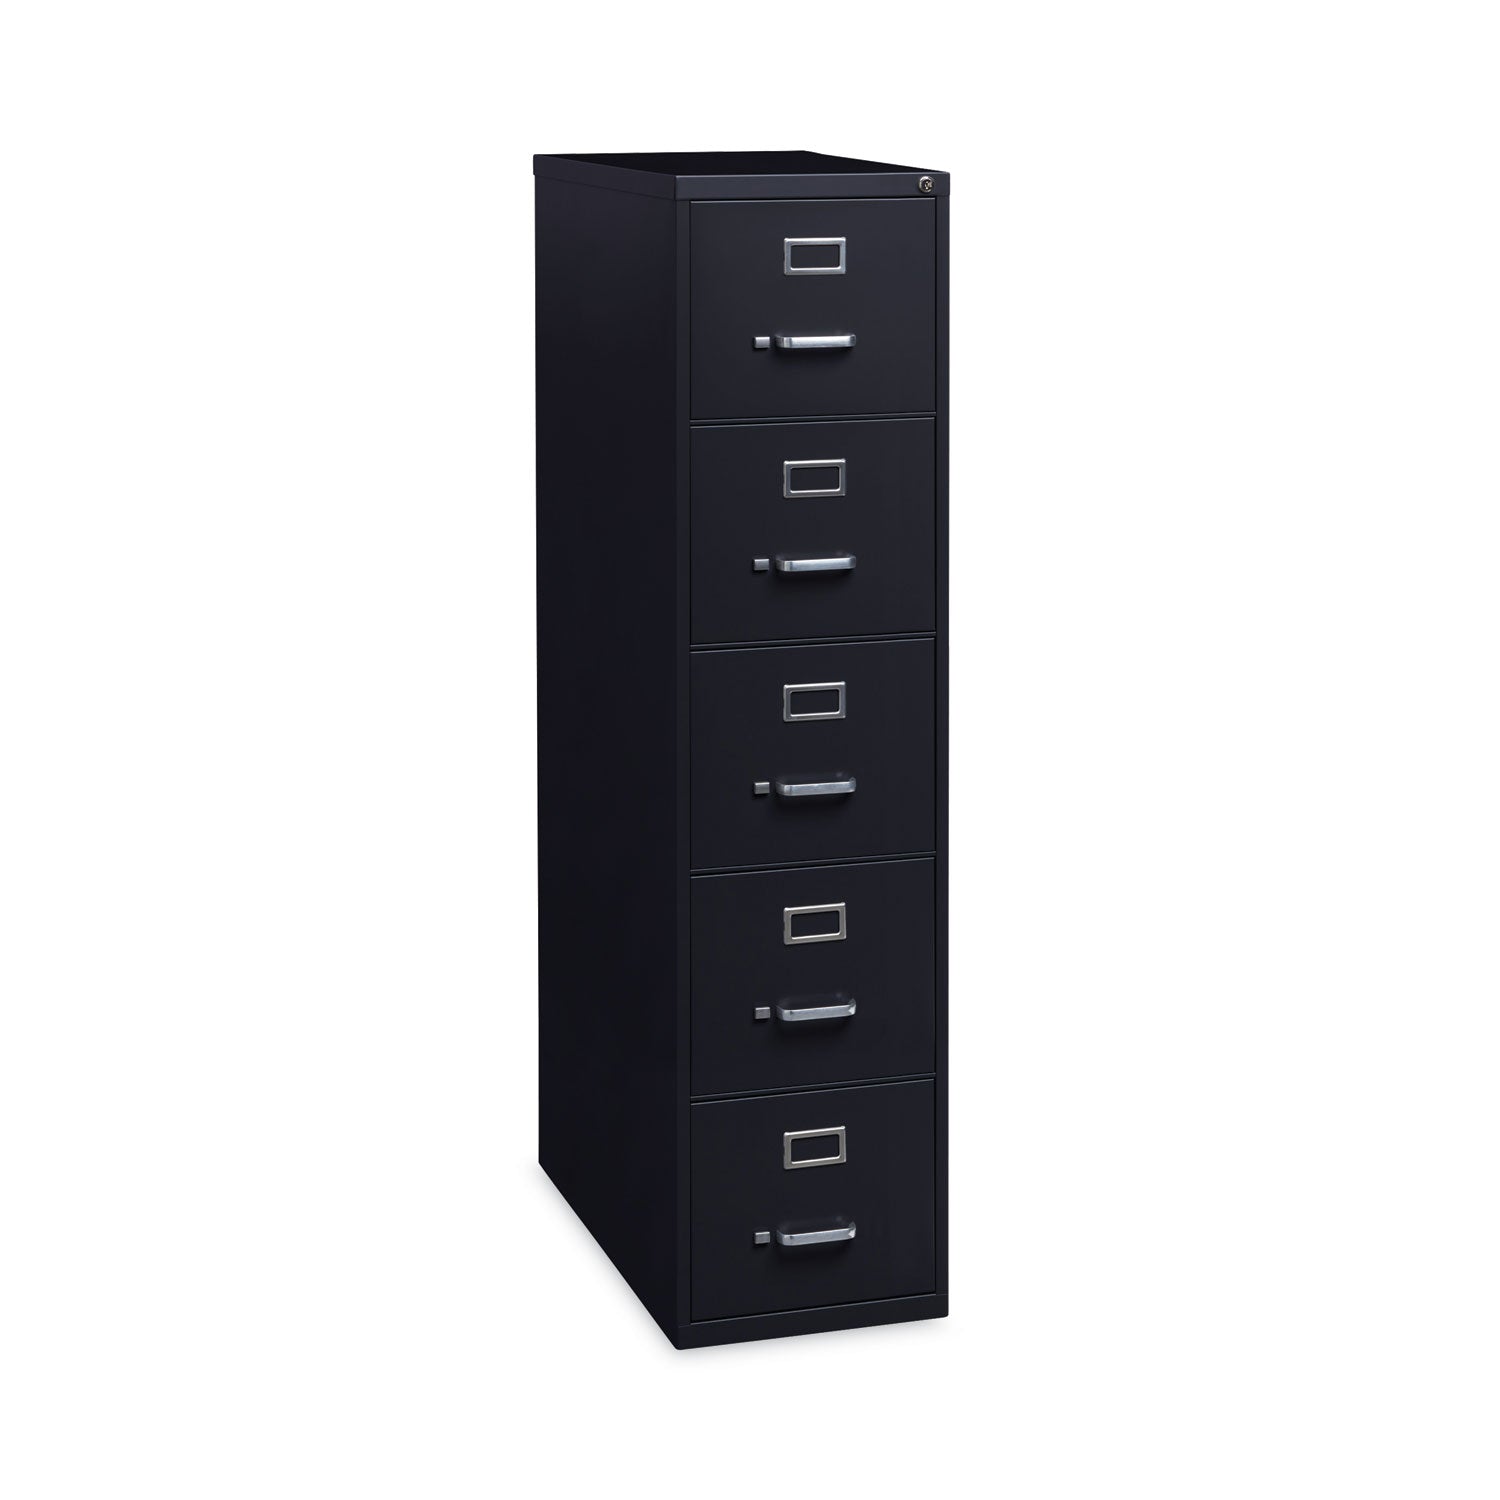 vertical-letter-file-cabinet-5-letter-size-file-drawers-black-15-x-265-x-6137_hid17778 - 1